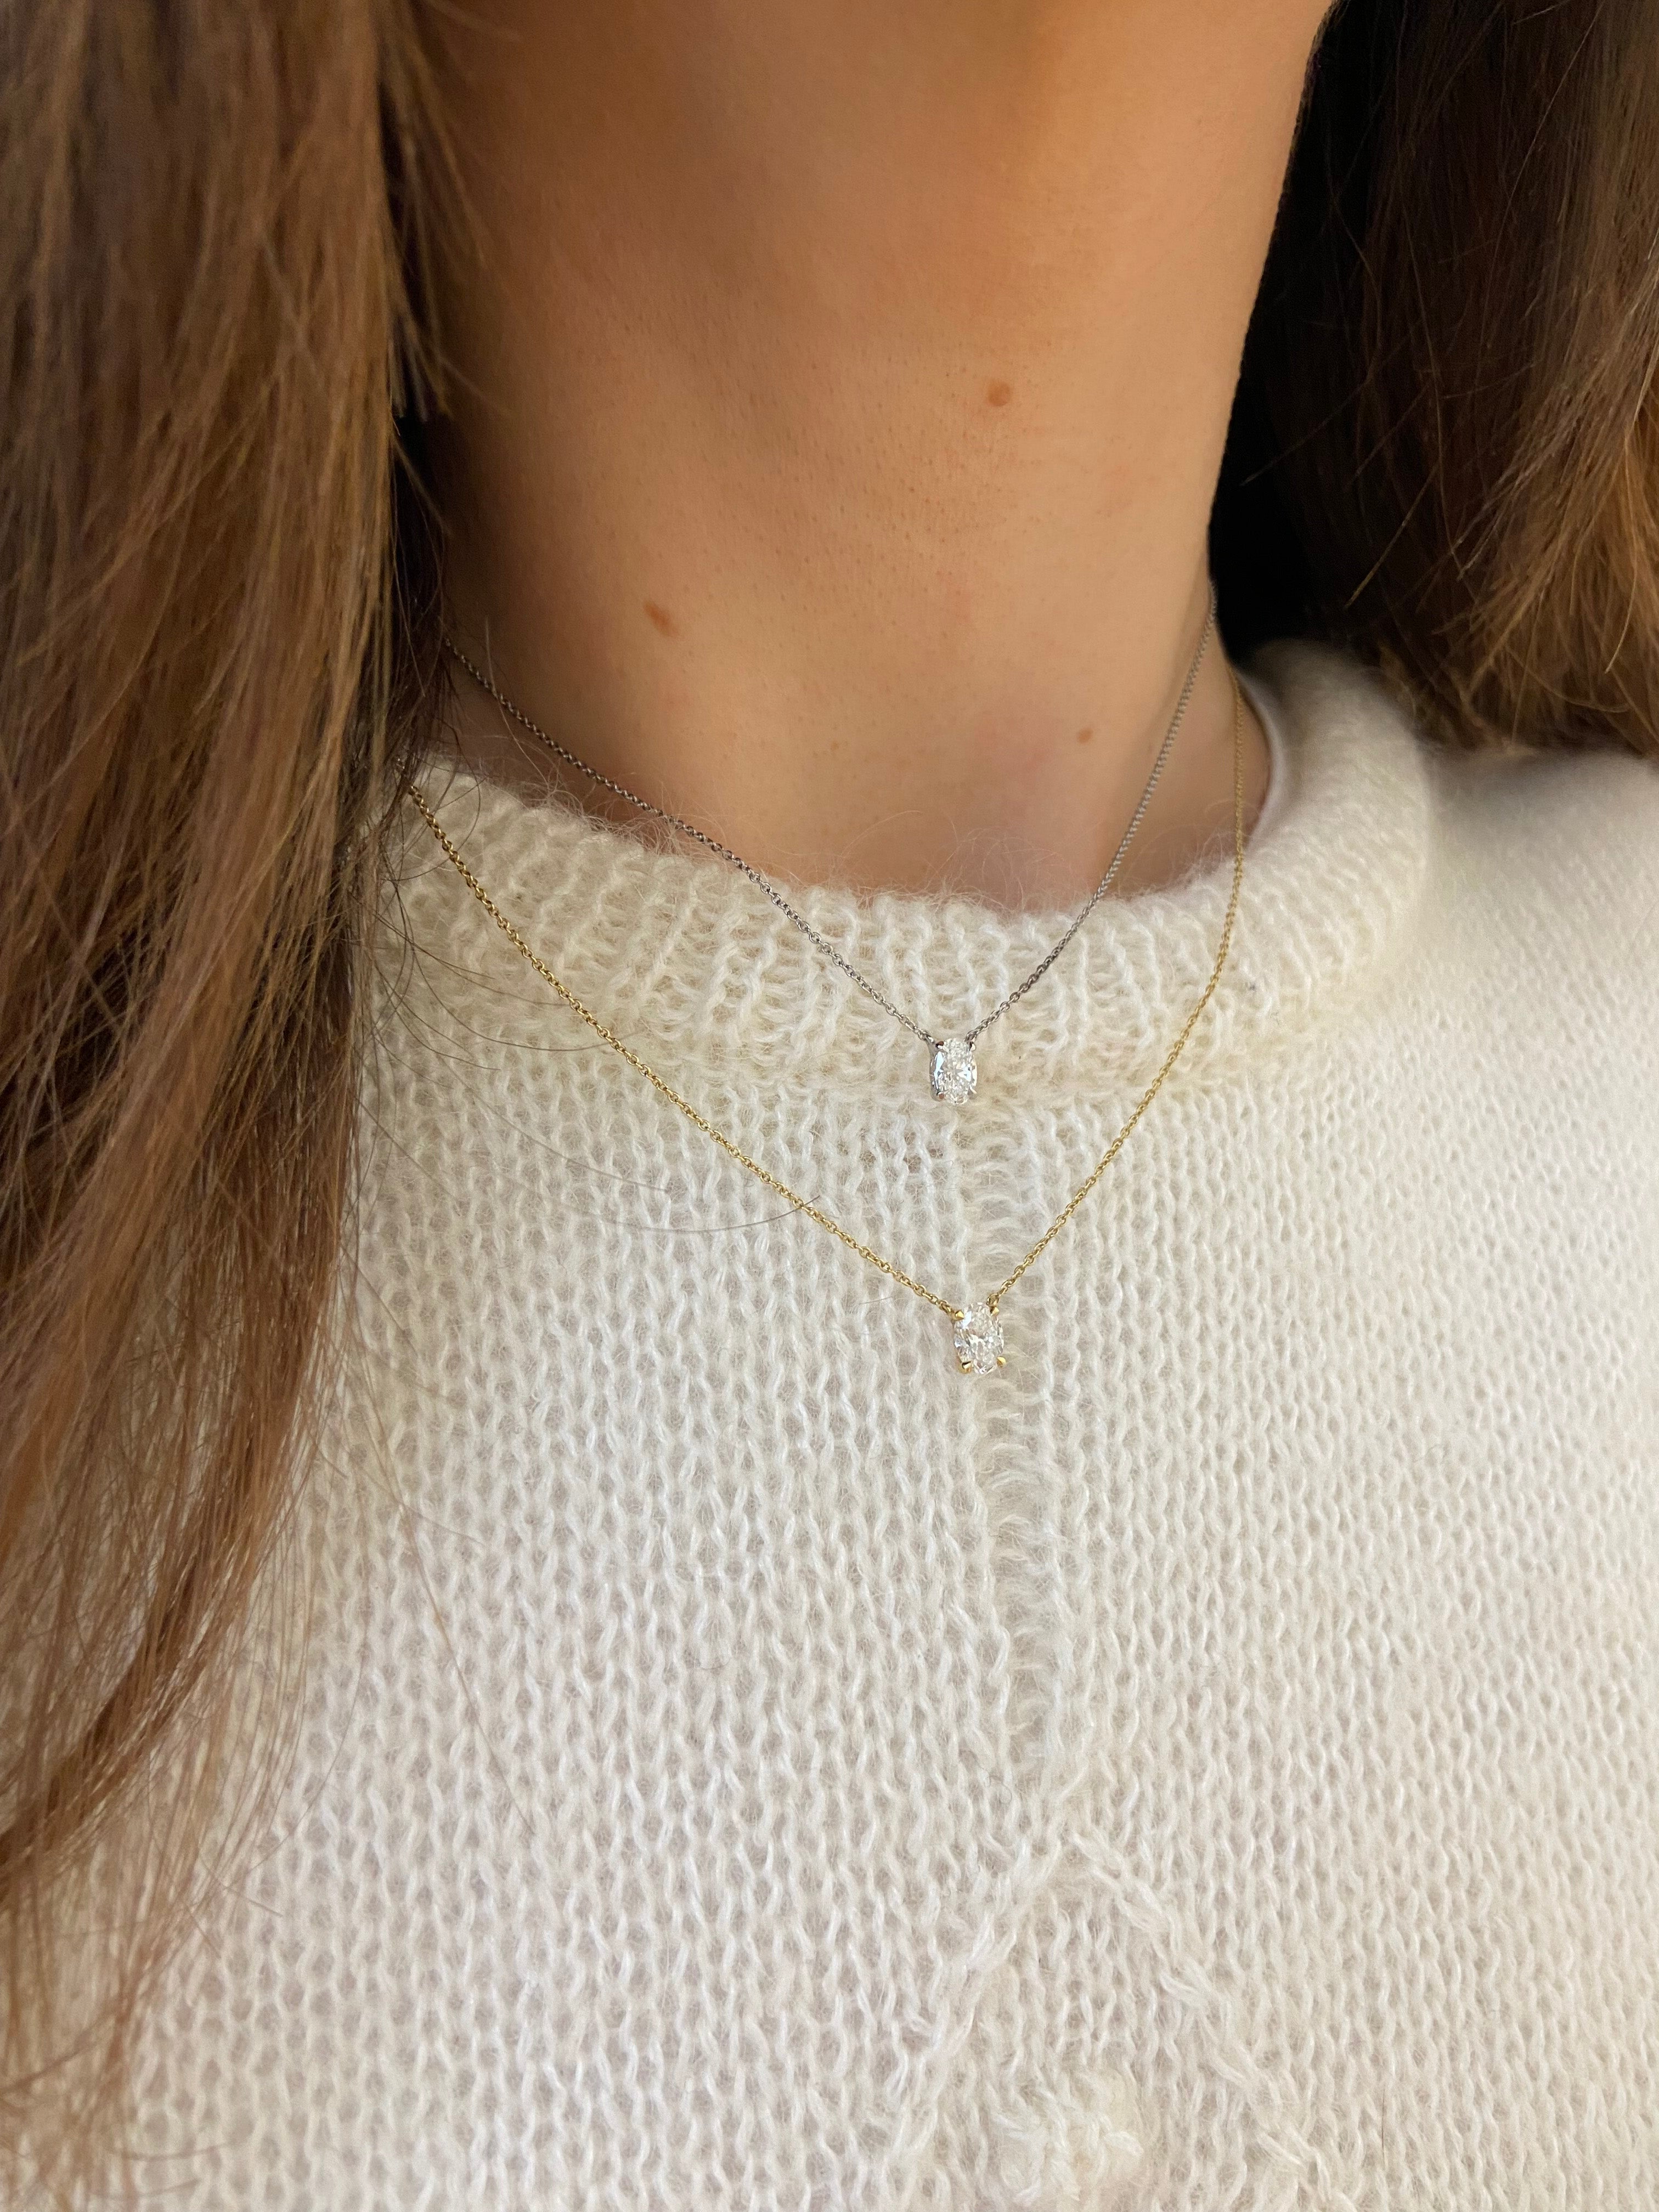 The Dainty Necklace